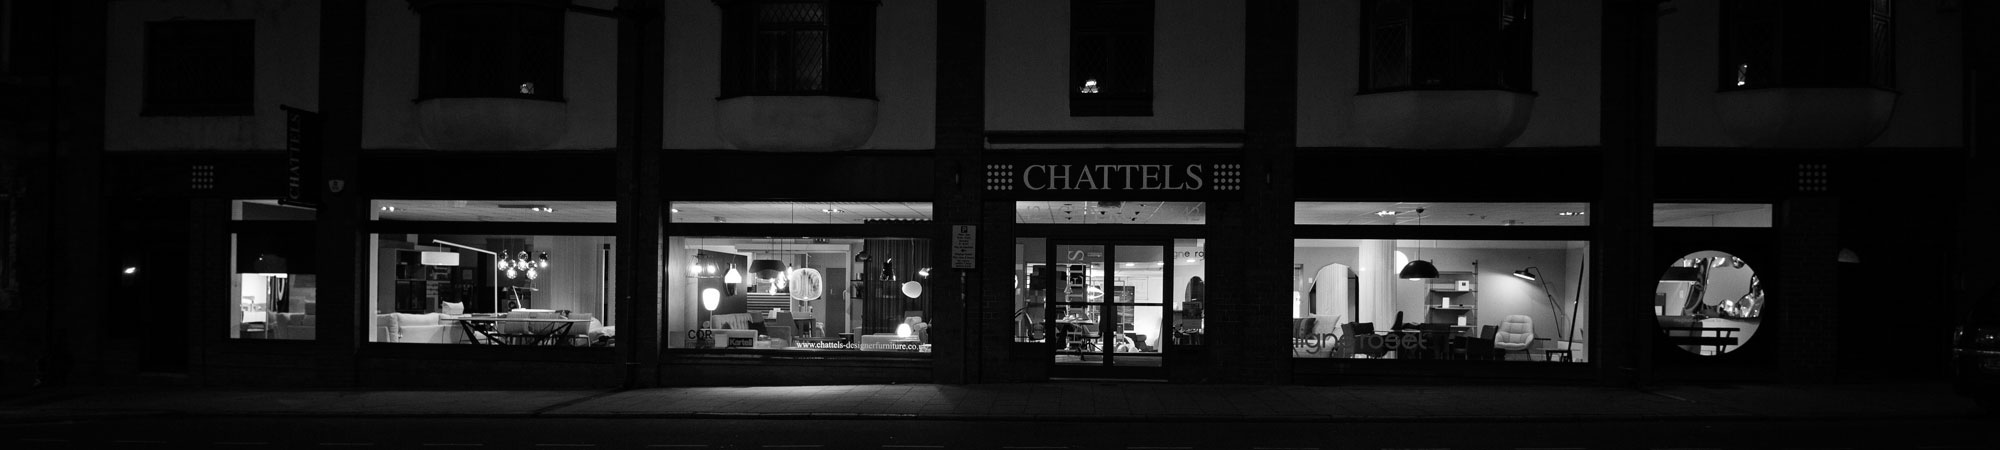 The Chattels team at their showroom in Chester city centre